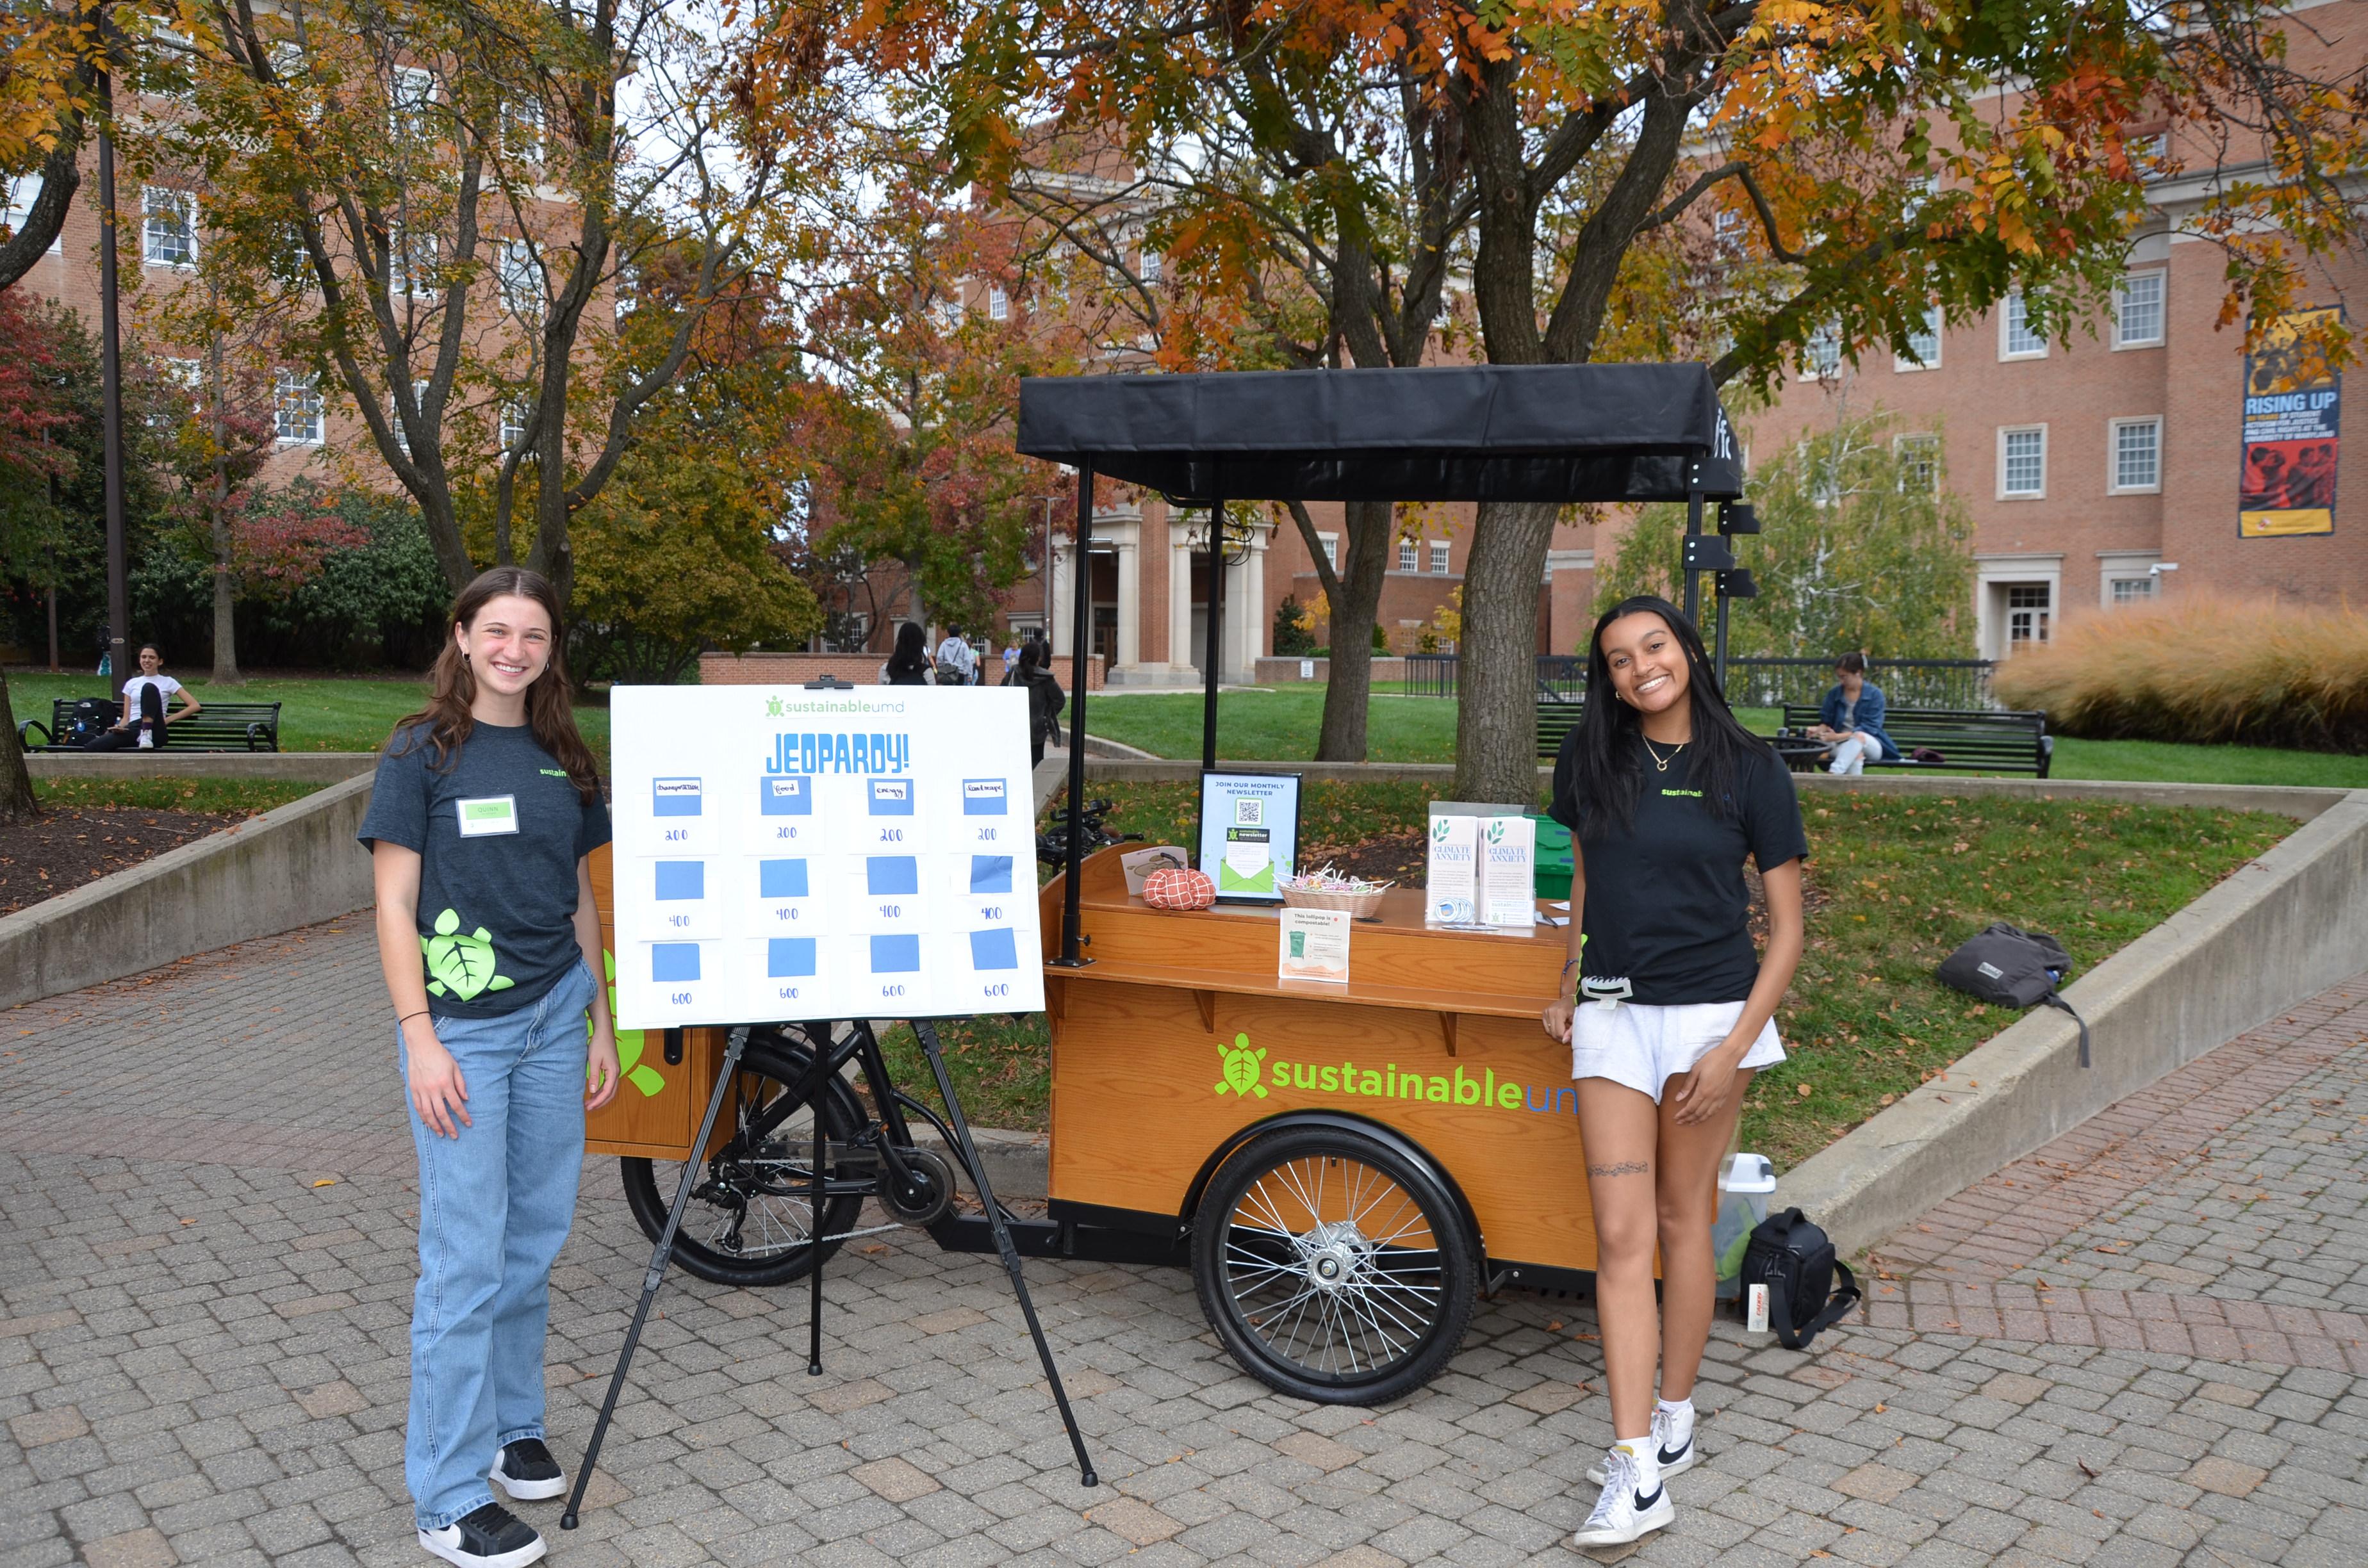 The Outreach Bike at the event!